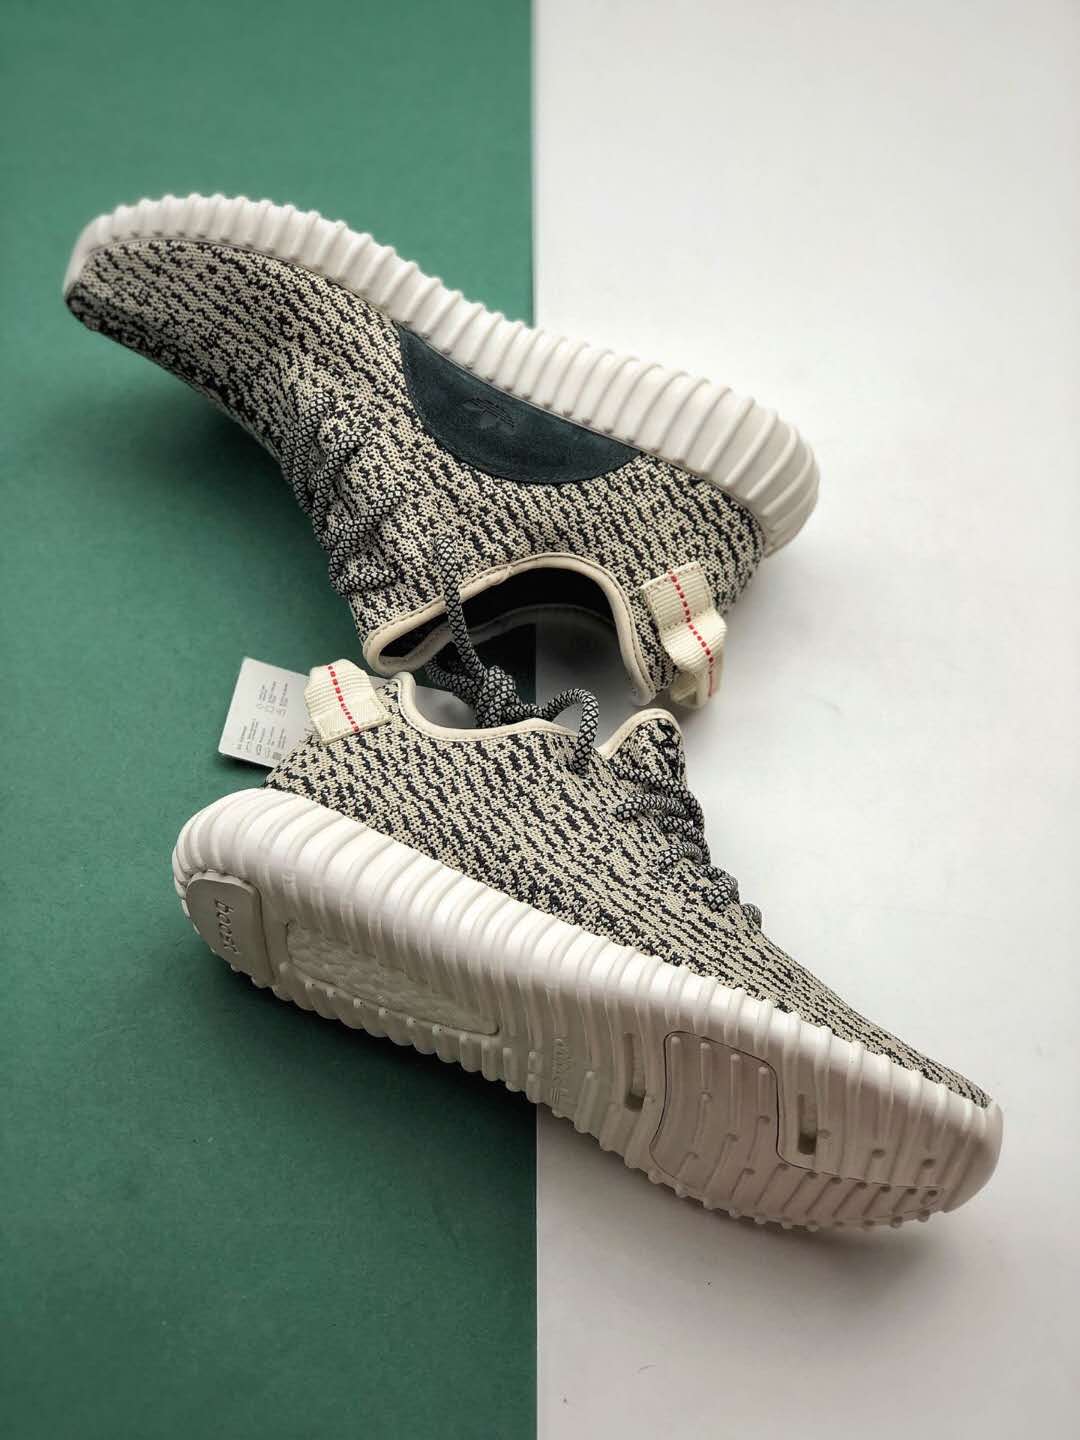 Adidas Yeezy Boost 350 Turtledove AQ4832 - Authentic Sneakers for Sale